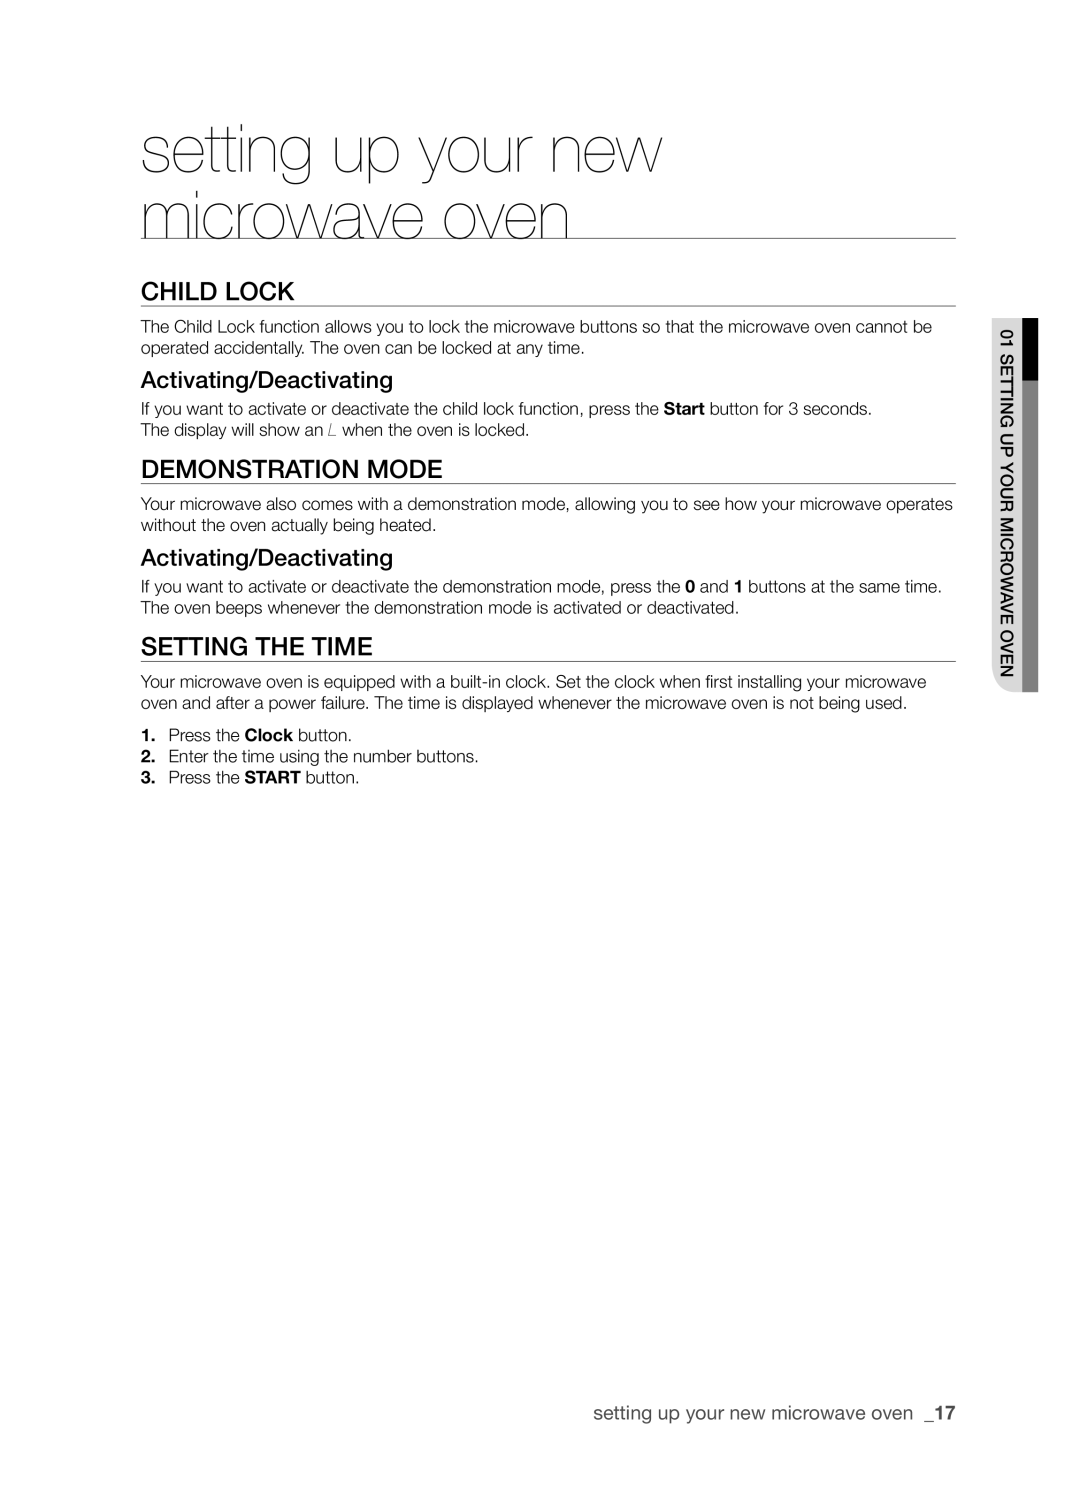 Samsung SMH9151 user manual Child lock, Demonstration mode, Setting the time, Activating/Deactivating 